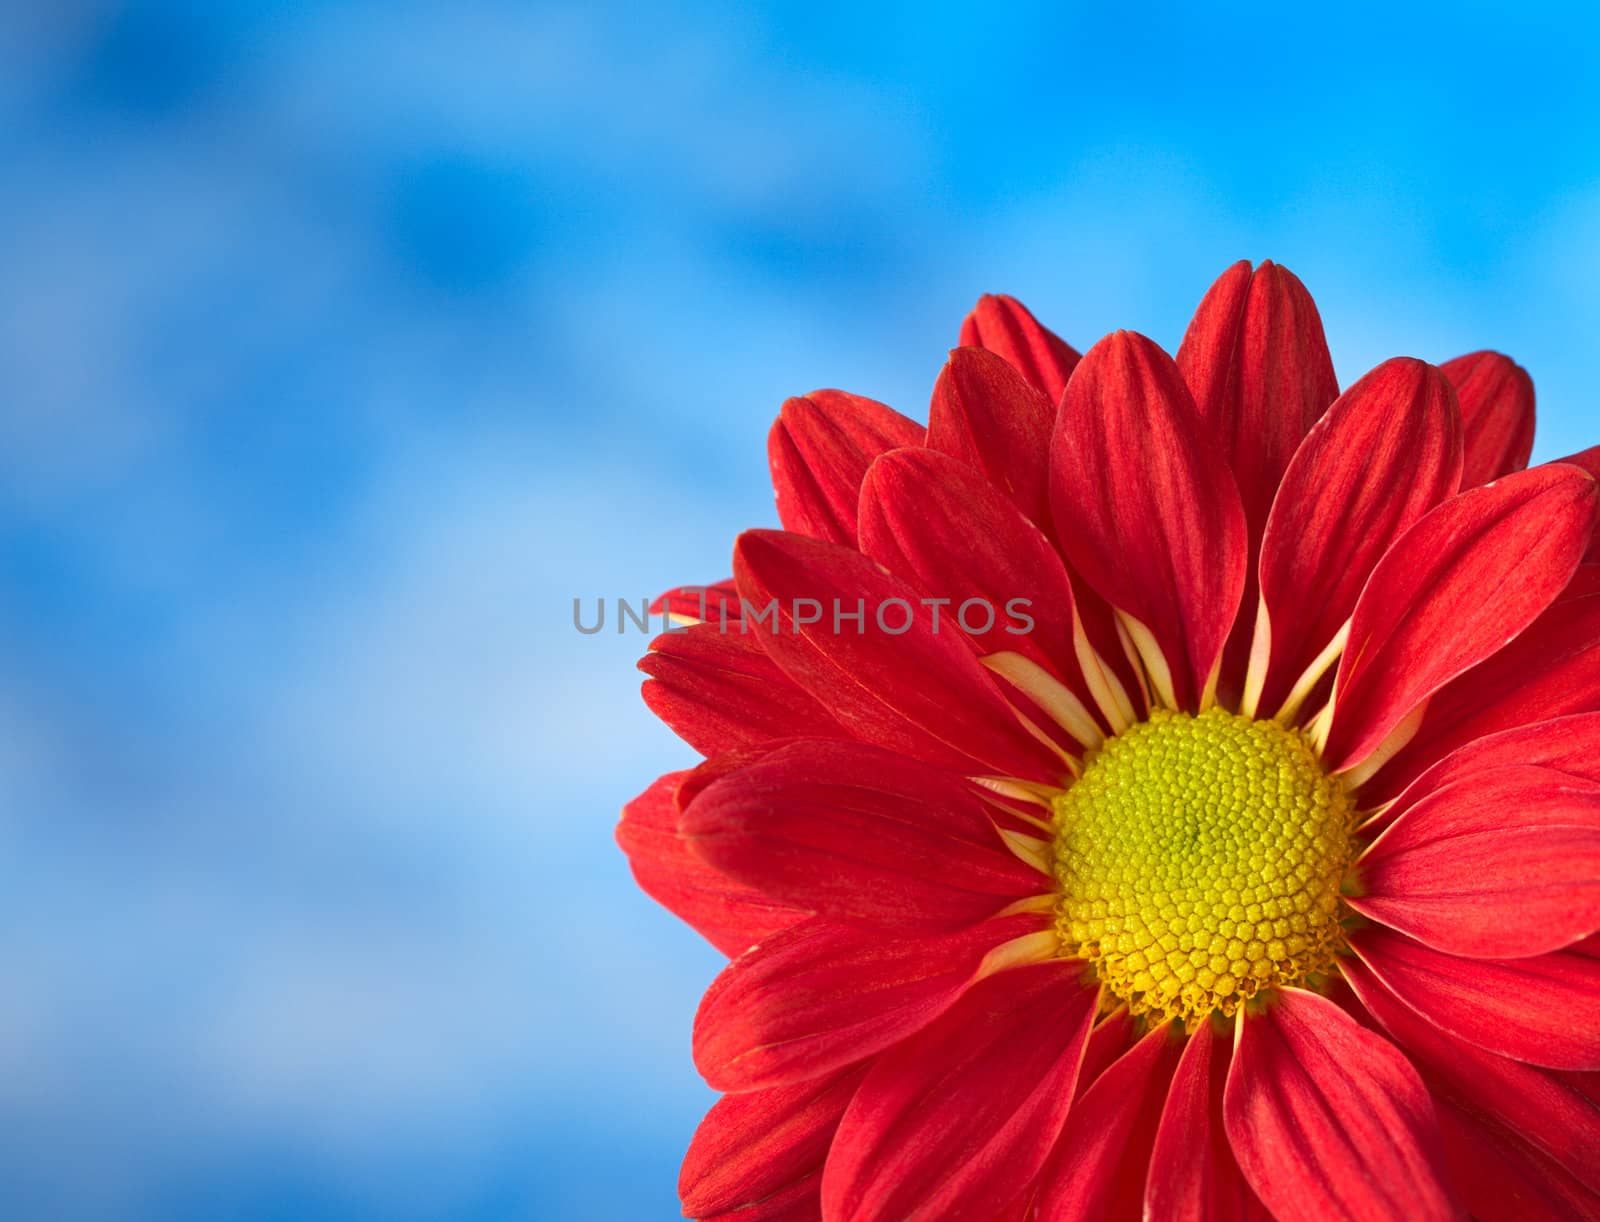 The macro of a red colored Chrysanthemum in front of blue background (Very Shallow Depth of Field, Focus on the middle of the flower)